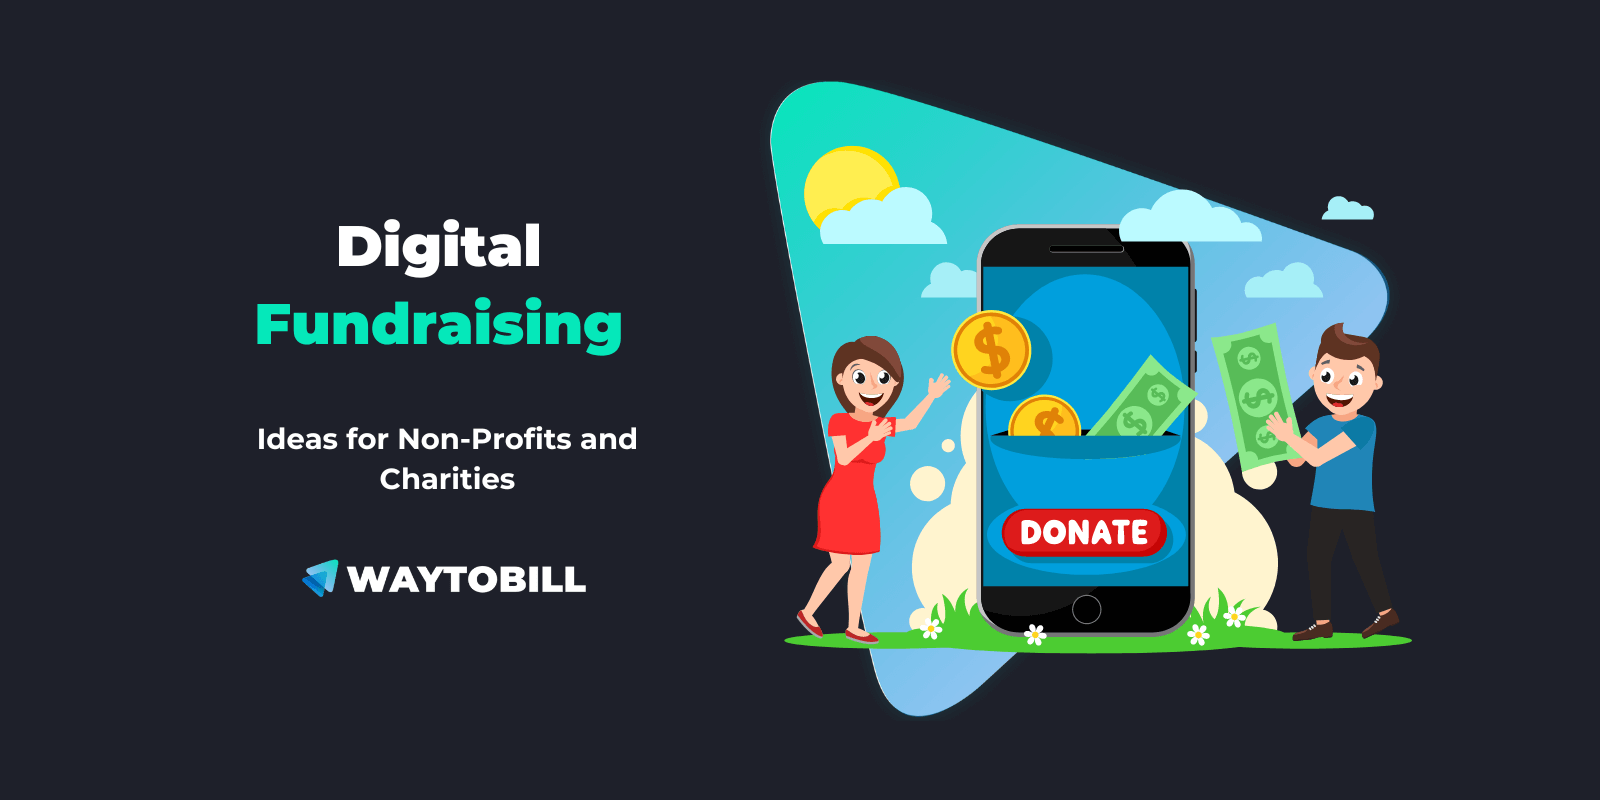 Digital Fundraising: Ideas for Non-Profits and How to Fundraise Online